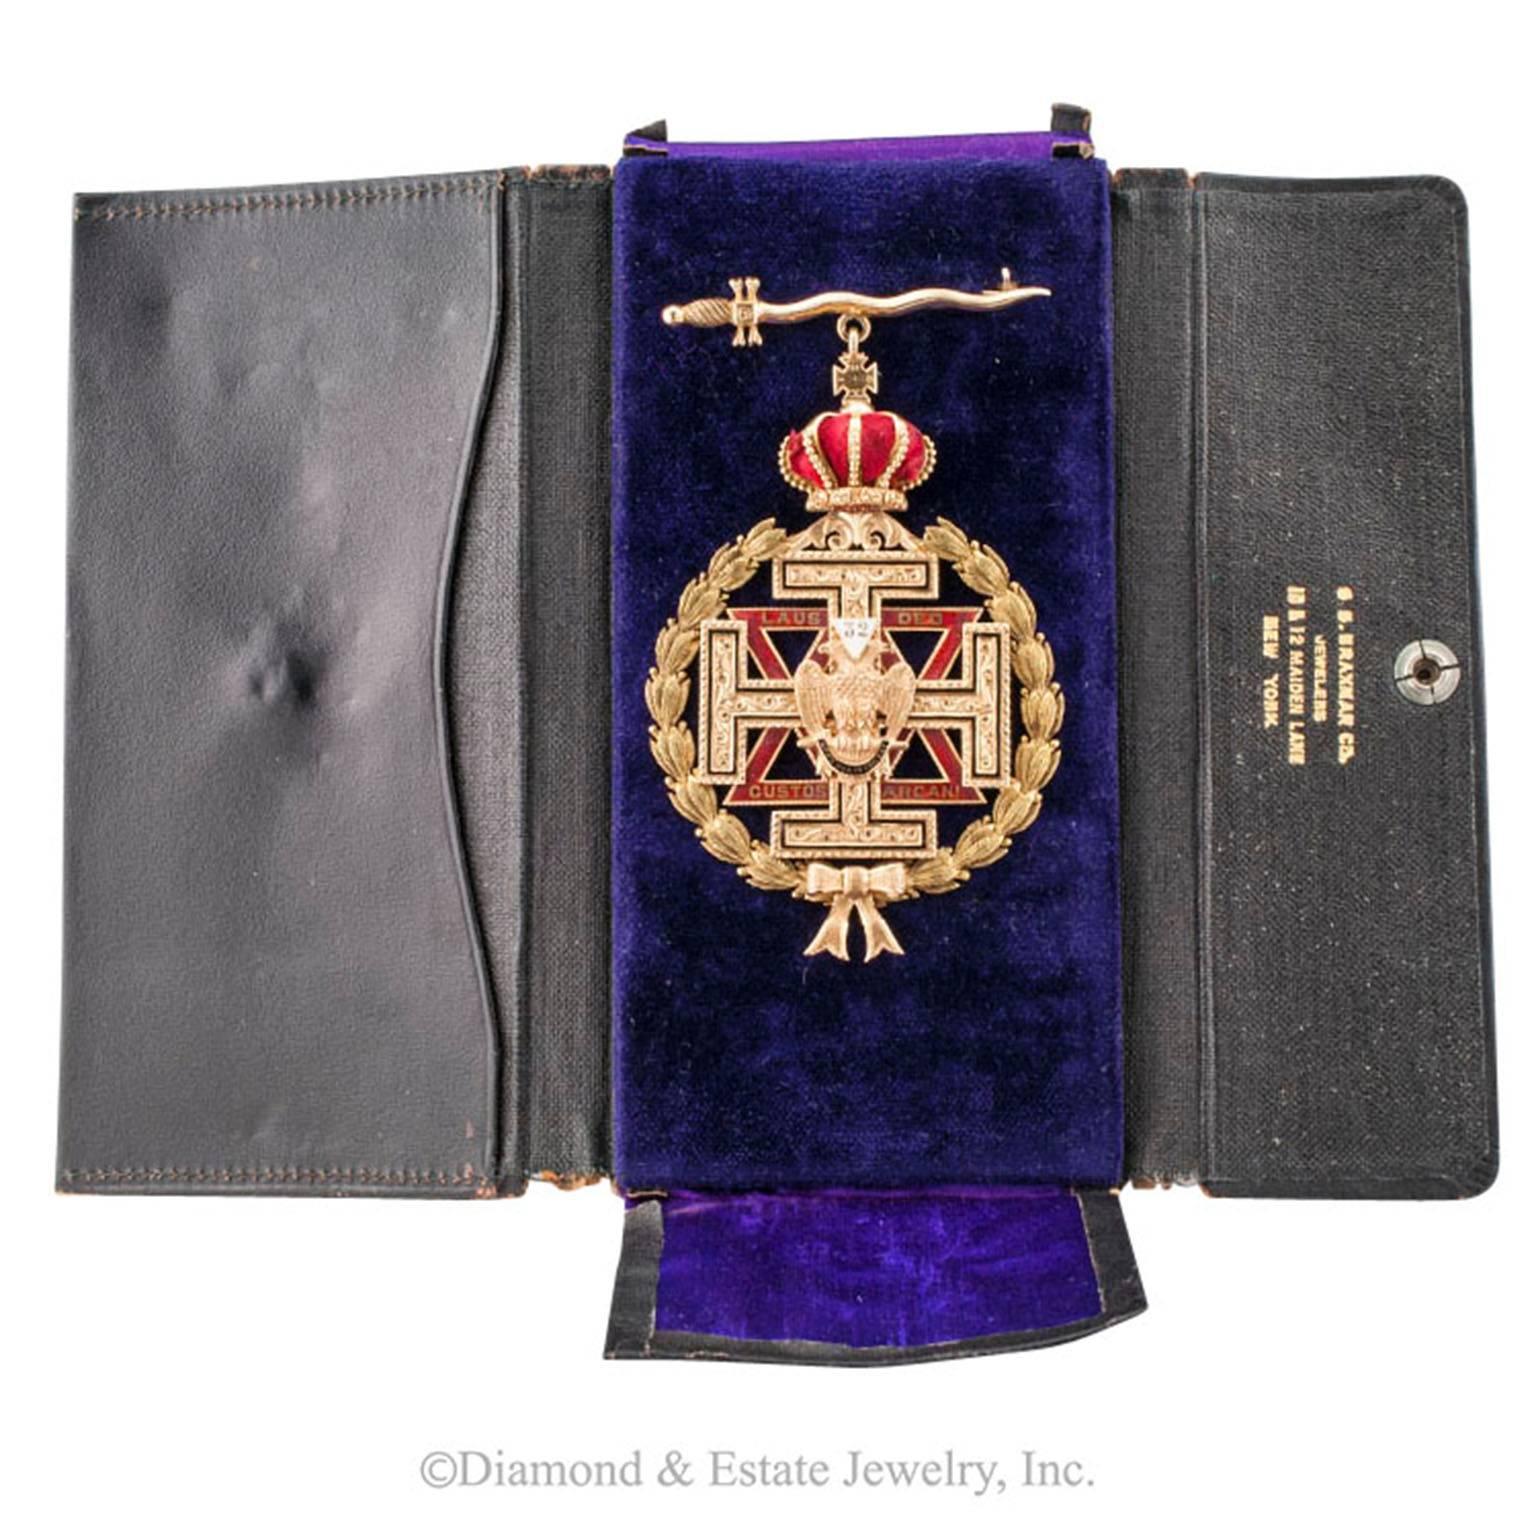 1910 Masonic 32nd Degree Enamel Gold Jewel

Antique Masonic 32nd degree enamel and gold jewel circa 1910.  This  large jewel is decorated throughout with Masonic symbols, crafted in 14-karat gold, accompanied by the original presentation leather